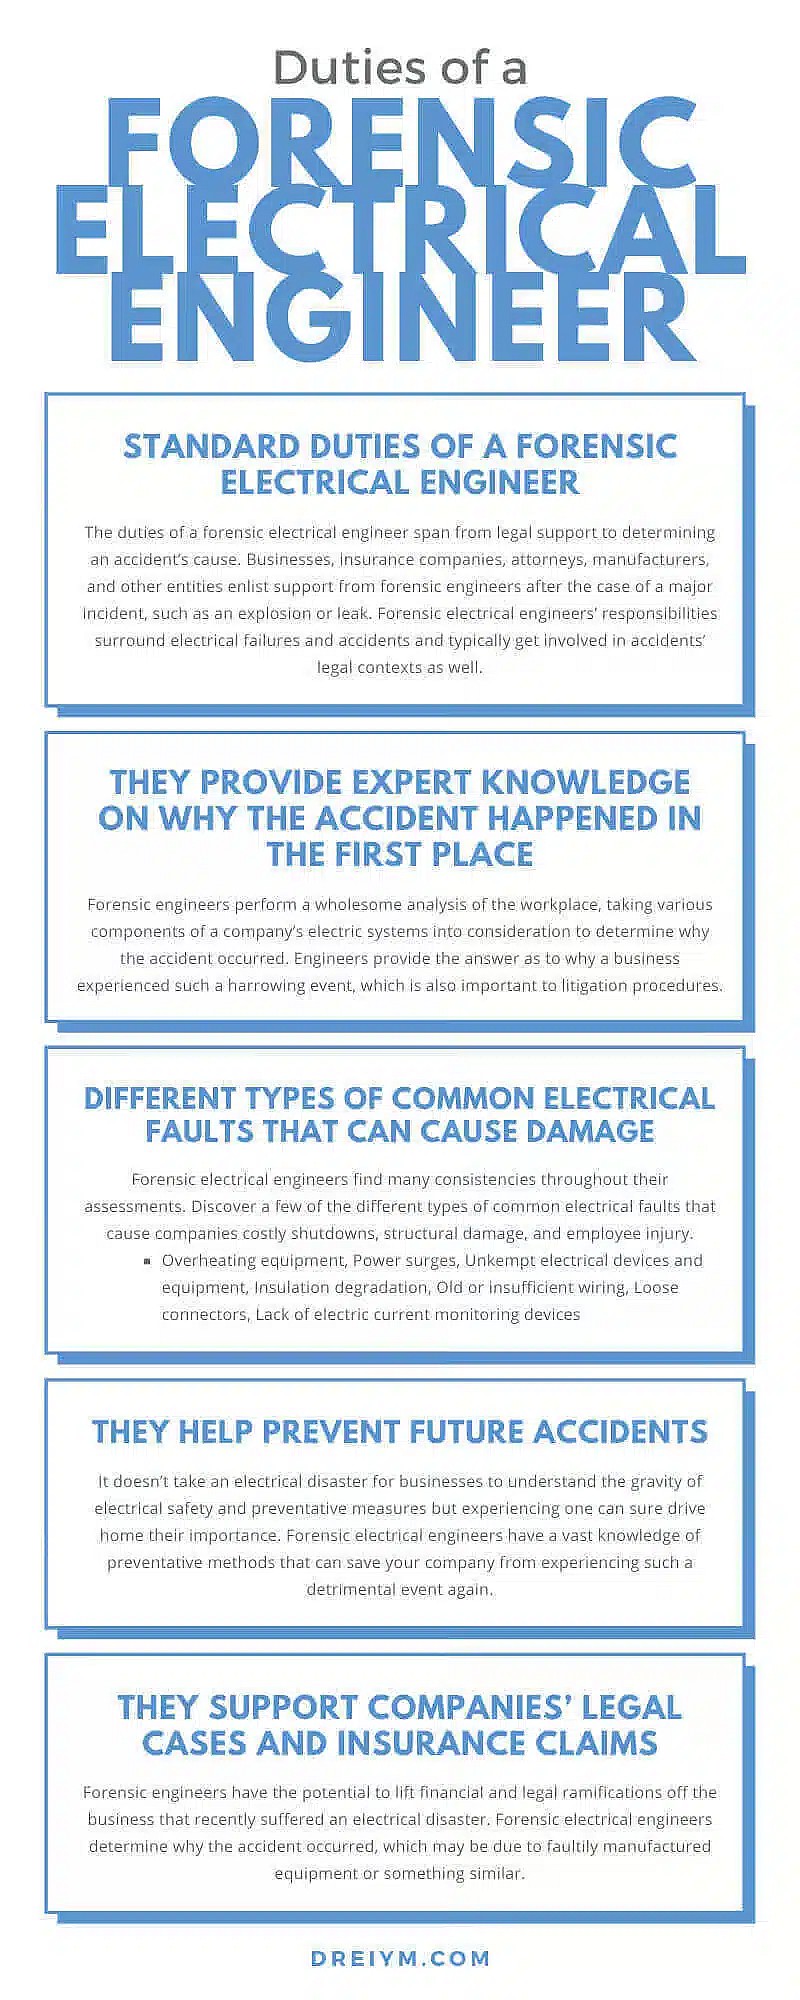 Duties of a Forensic Electrical Engineer